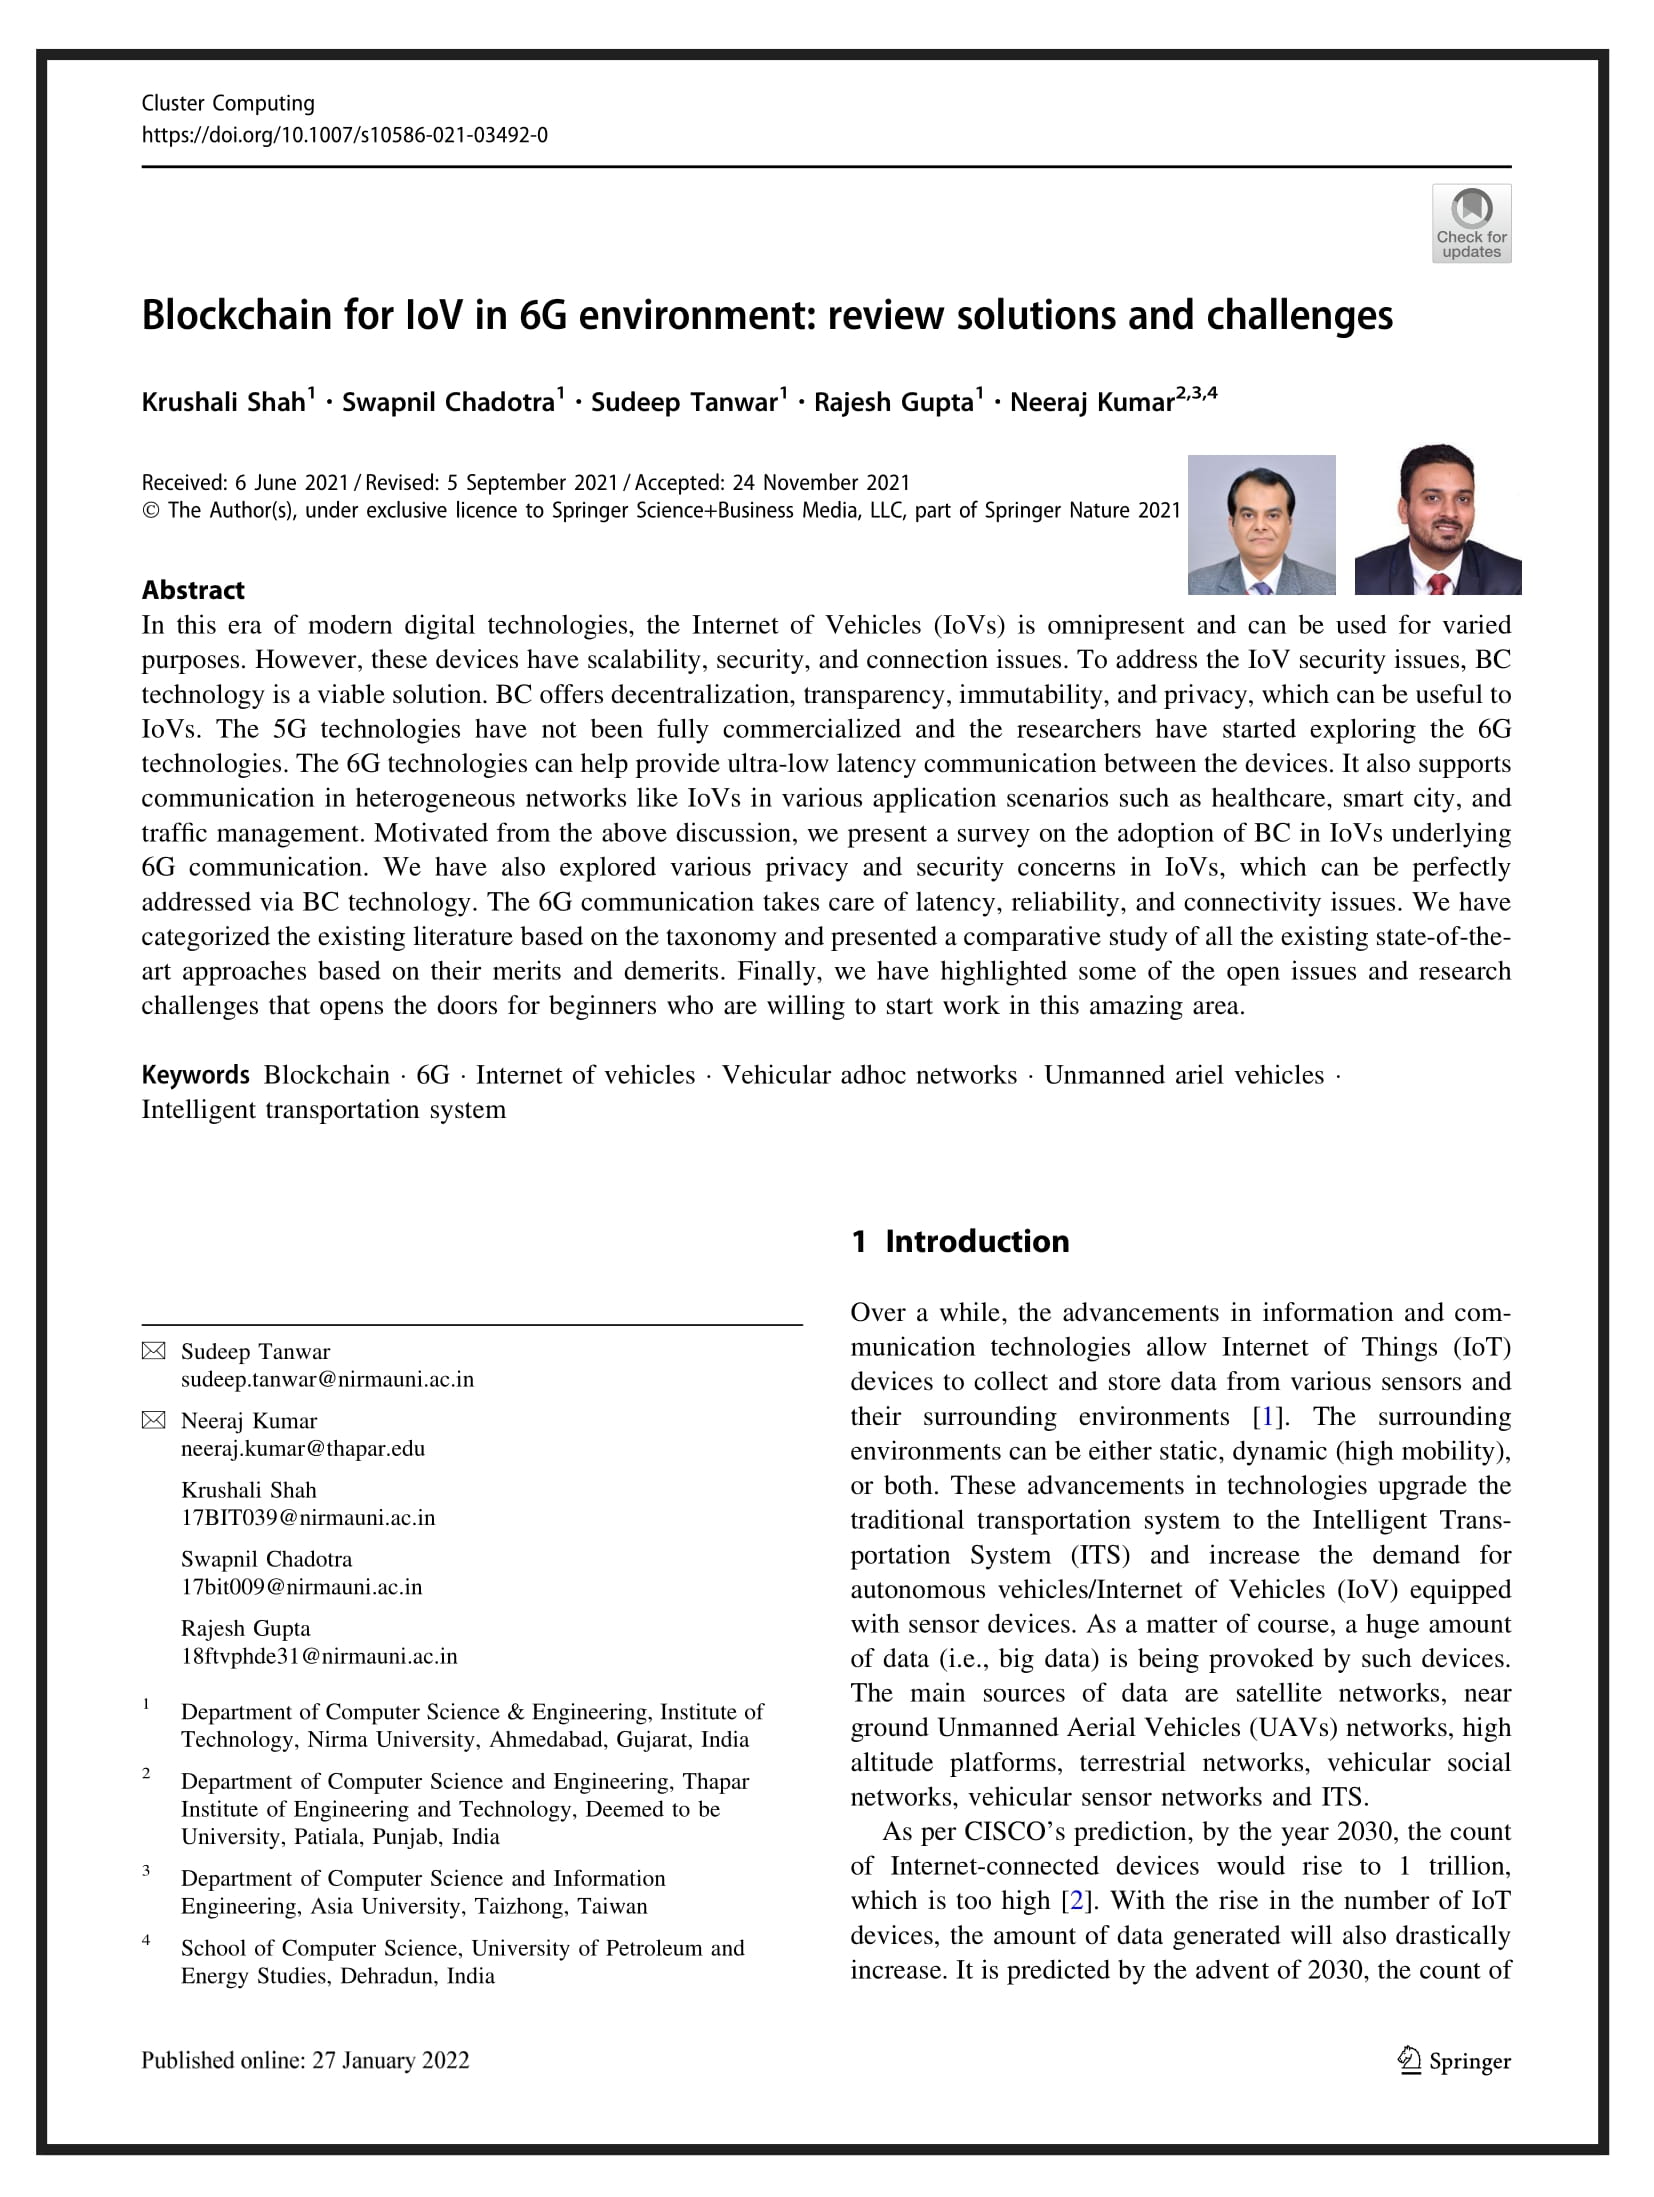 Blockchain for IoV in 6G environment: review solutions and challenges